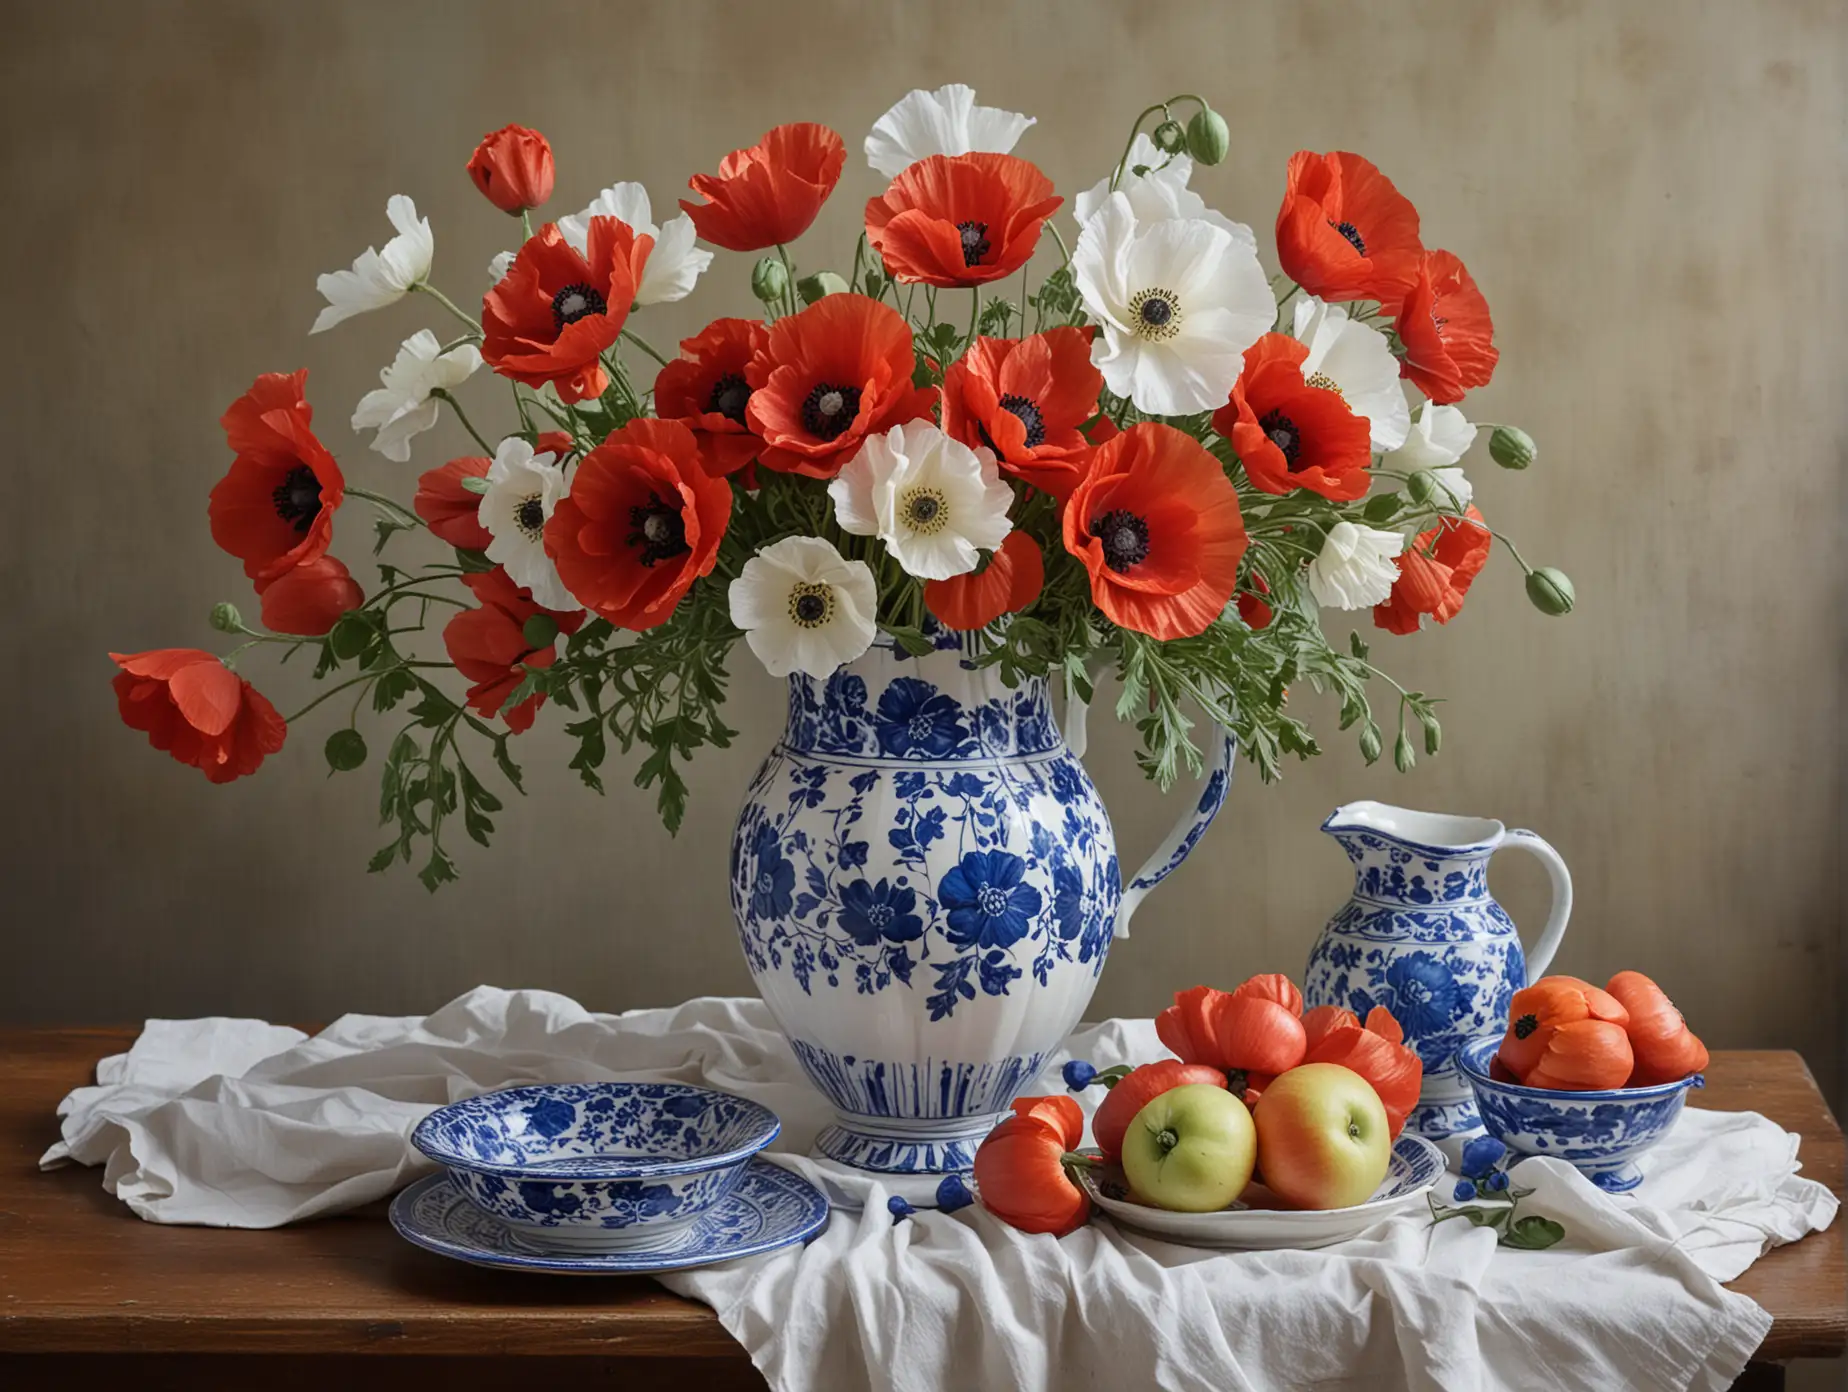 Vibrant Red and White Poppies Arrangement with Blue and White Accents